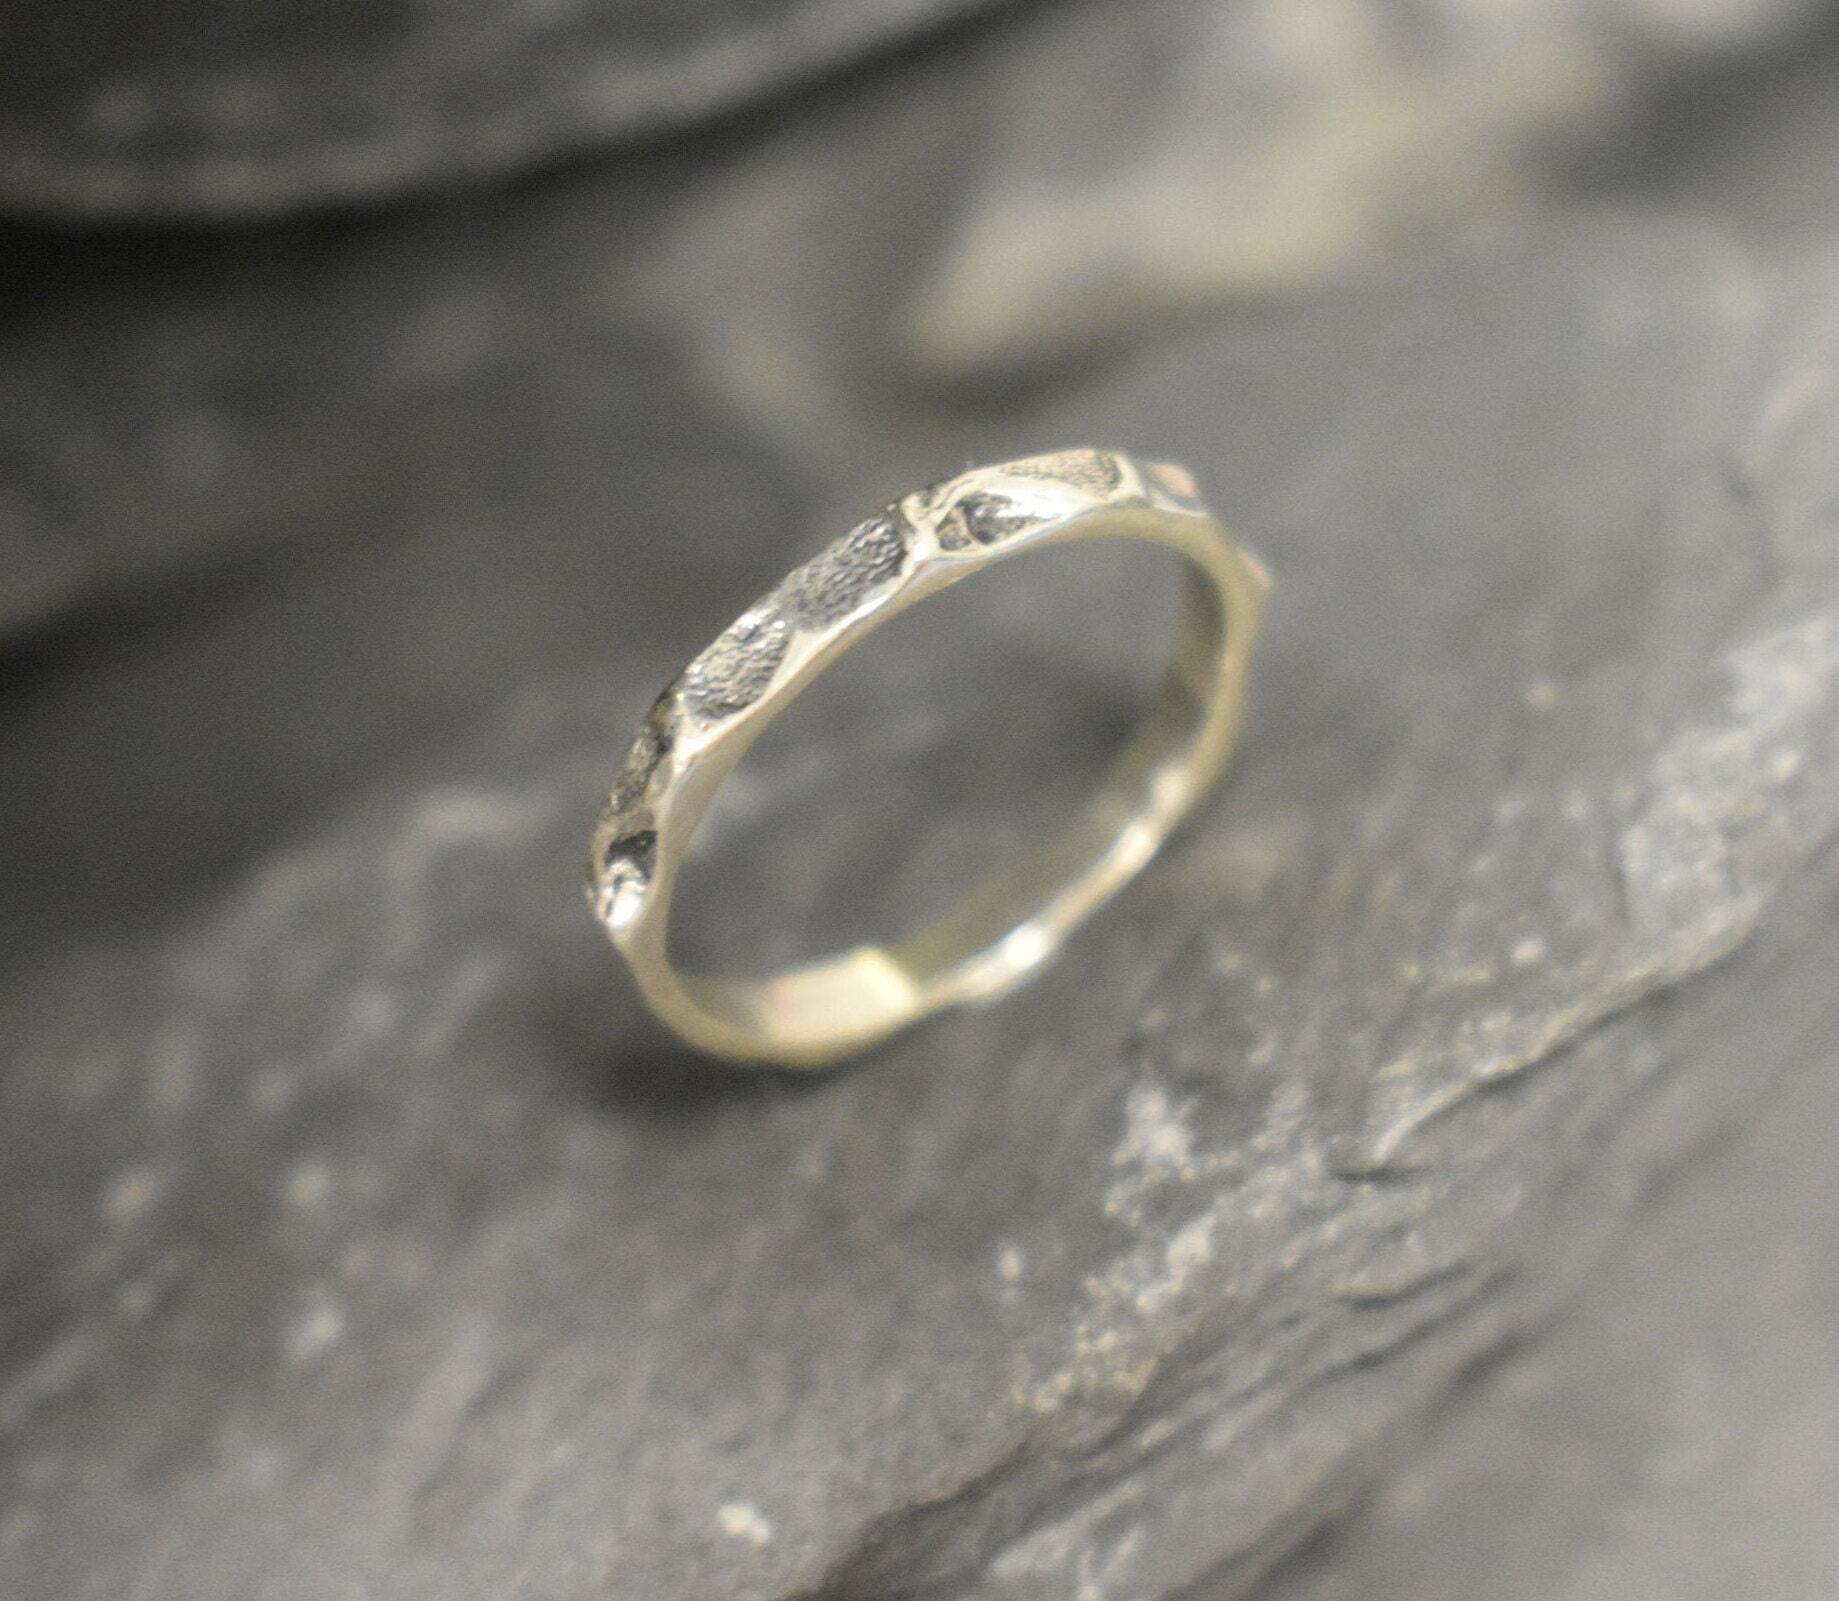 Silver Hammered Band, Stackable Band, Solid Silver Ring, Artistic Ring, Sterling Silver Ring, Vintage Ring, Patterned Band, Hammered Design